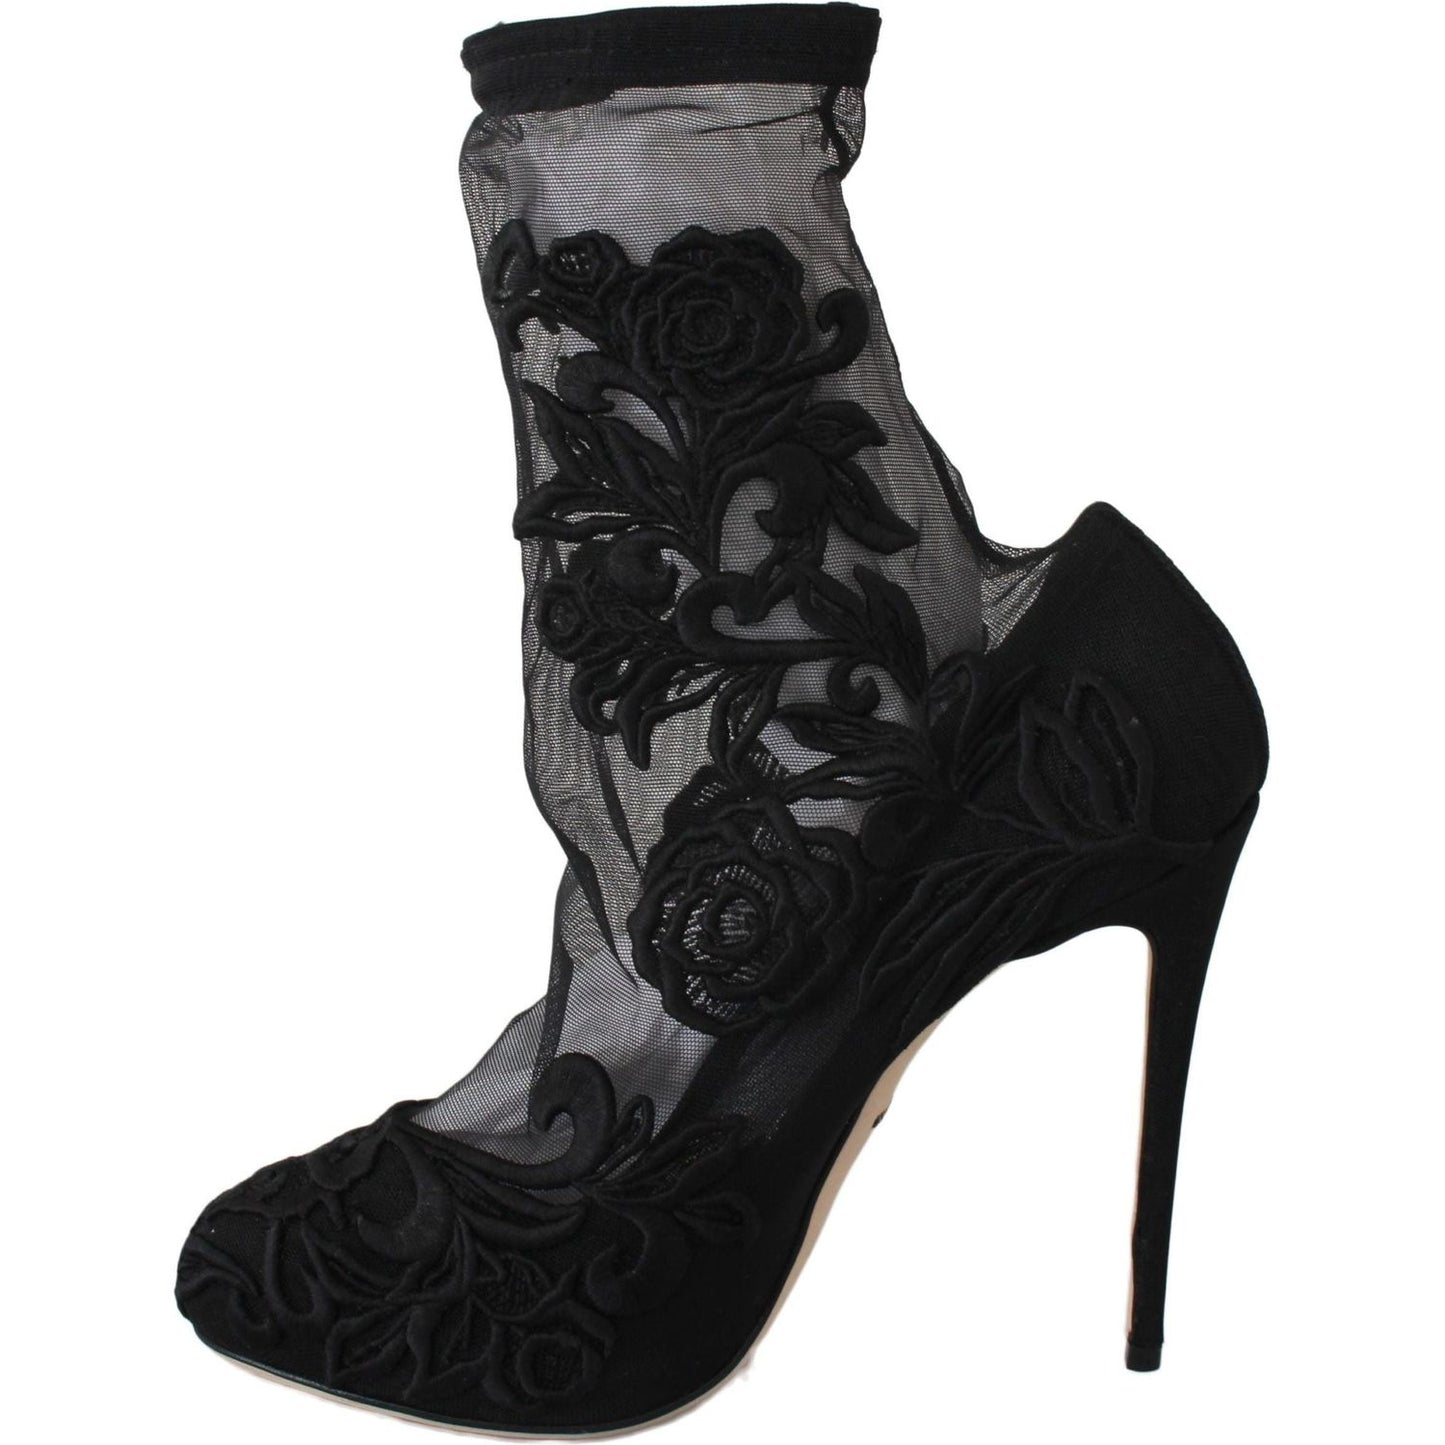 Dolce & Gabbana Embroidered Floral Stiletto Socks Booties Shoes black-roses-stilettos-booties-socks-shoes